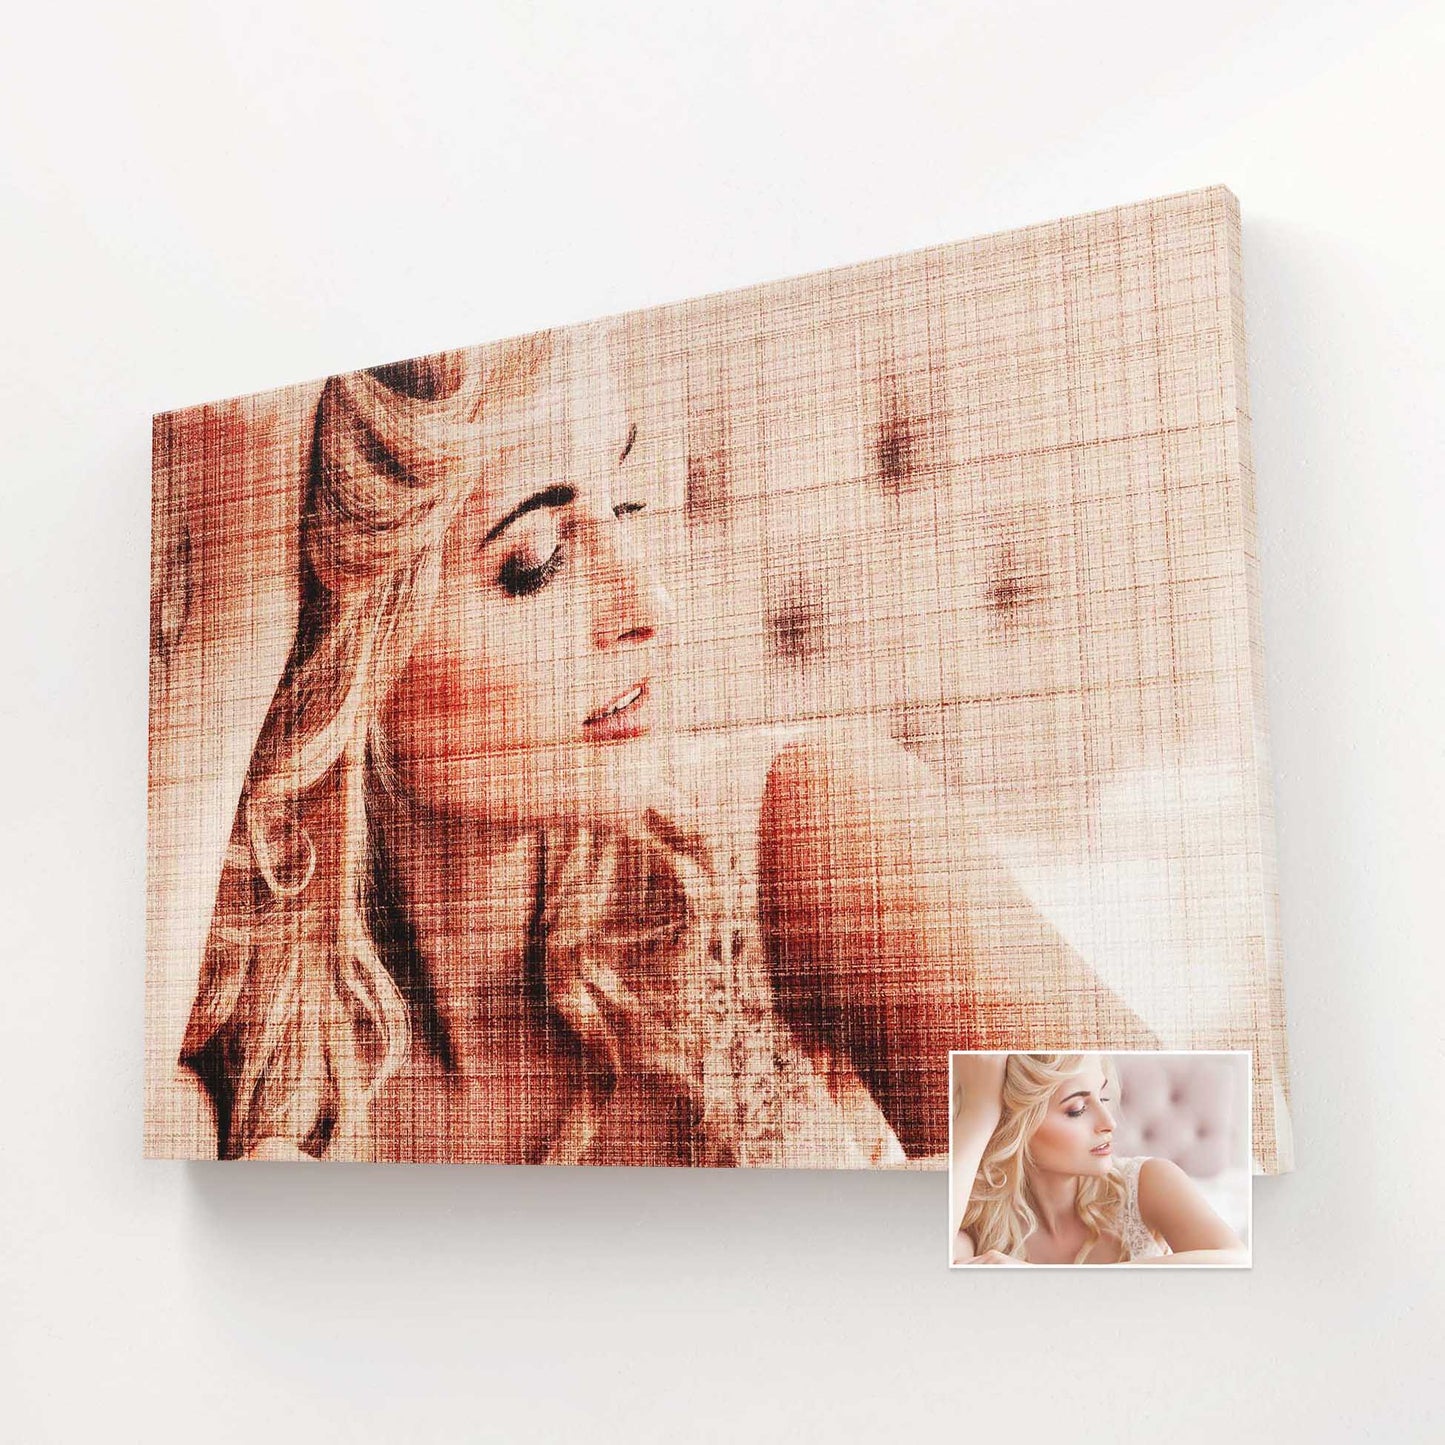 Bring your memories to life with a Personalised Fabric Texture Canvas. This canvas is created by painting from your photo, resulting in a truly unique and original piece of art. With its fine art quality, it's an ideal choice for wedding